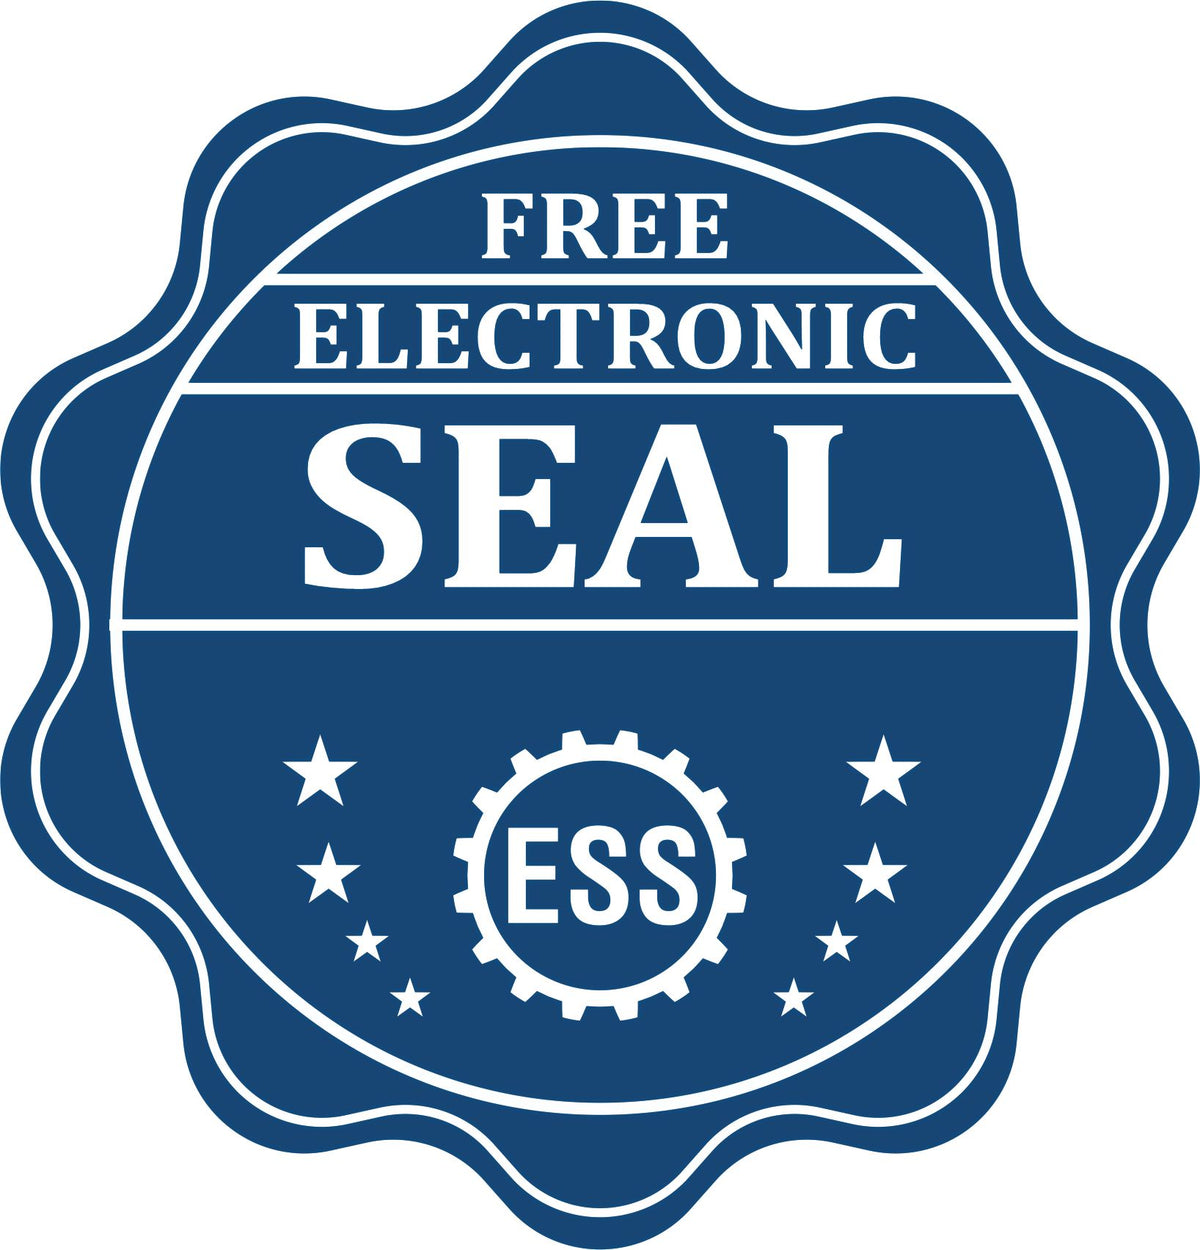 A badge showing a free electronic seal for the Indiana Desk Surveyor Seal Embosser with stars and the ESS gear on the emblem.